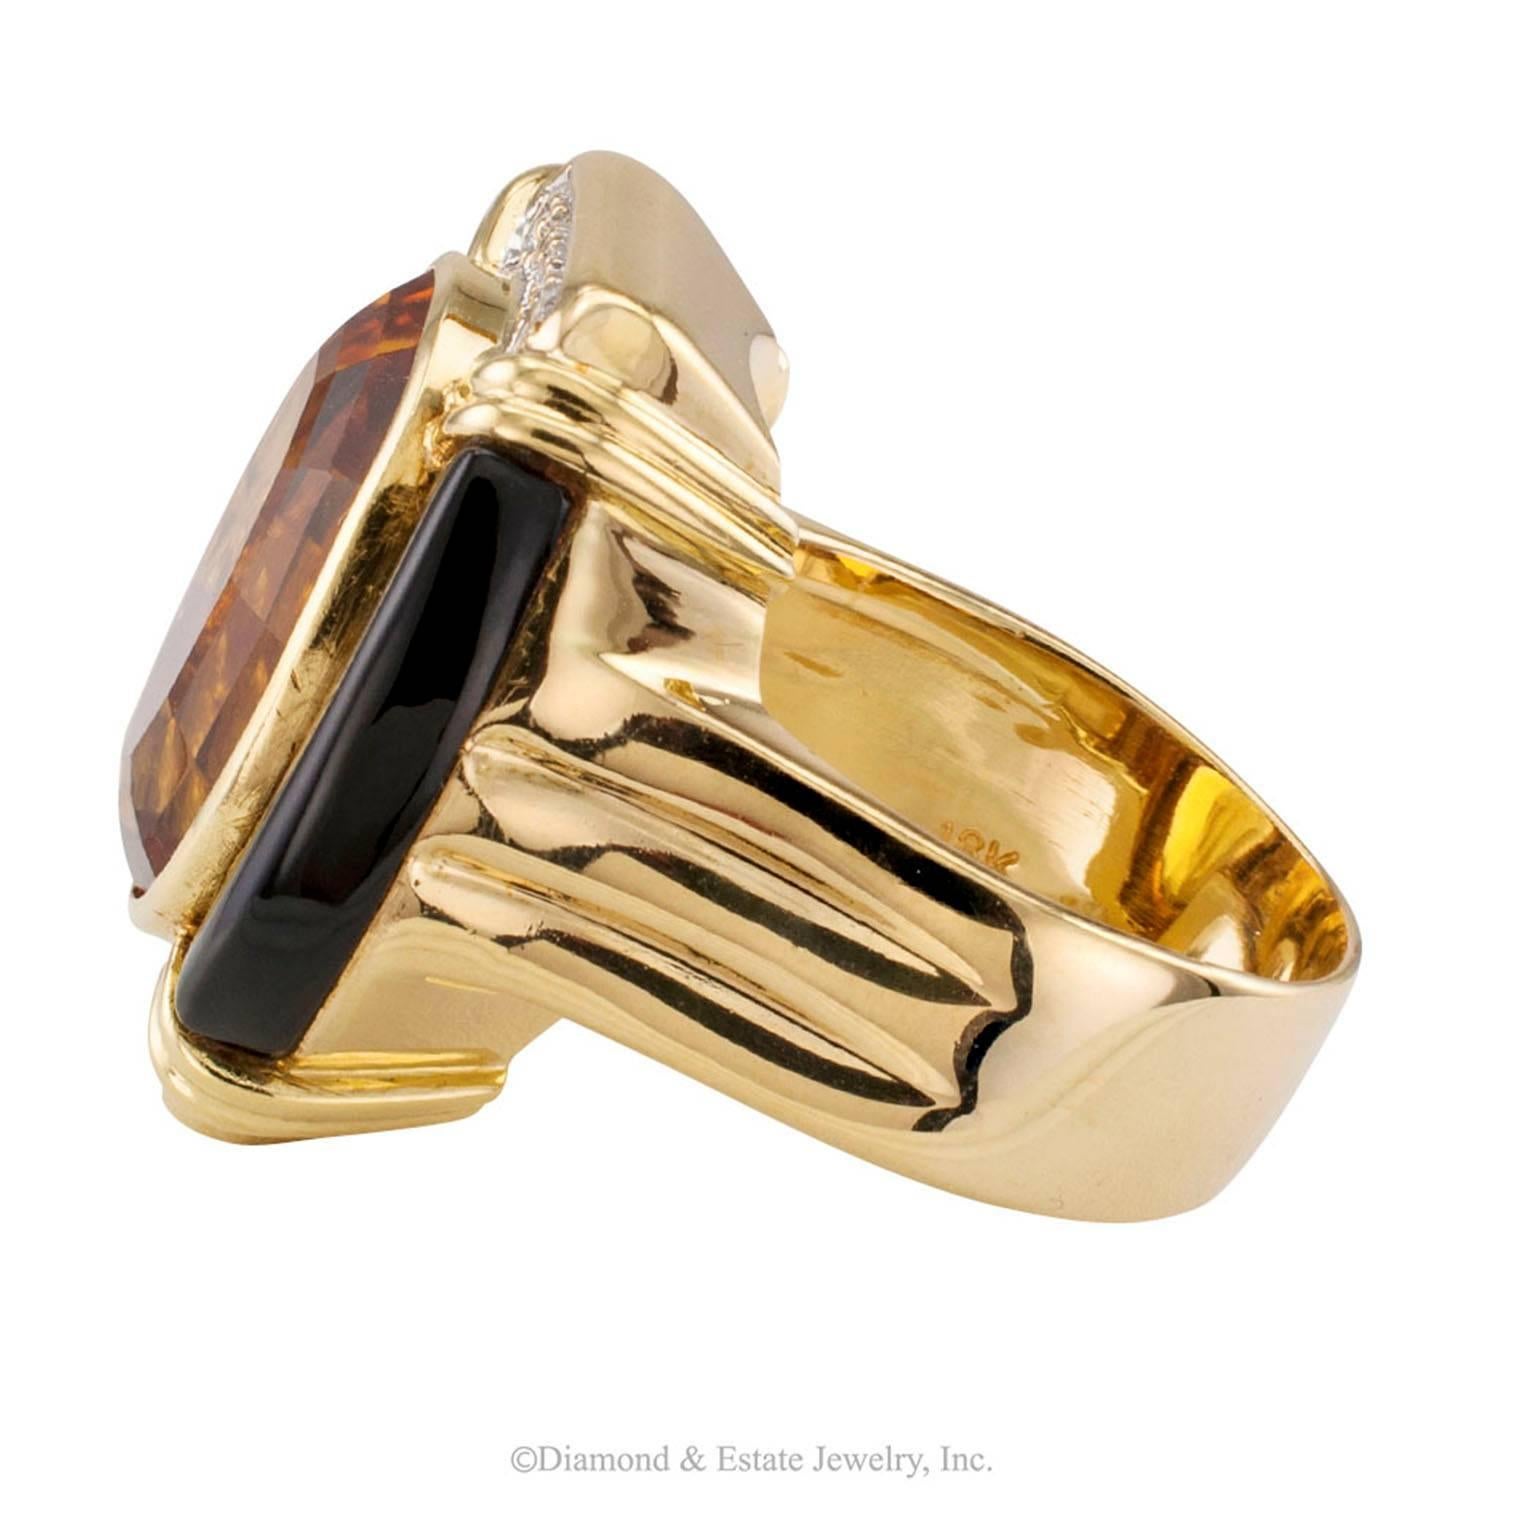 1980s Citrine Onyx Diamond Gold Ring

Citrine onyx and diamond gold cocktail ring circa 1980.  The larger oval citrine within a bold split frame formed by tubular black onyx caps set with diamonds to the horizontal planes, all on top of a